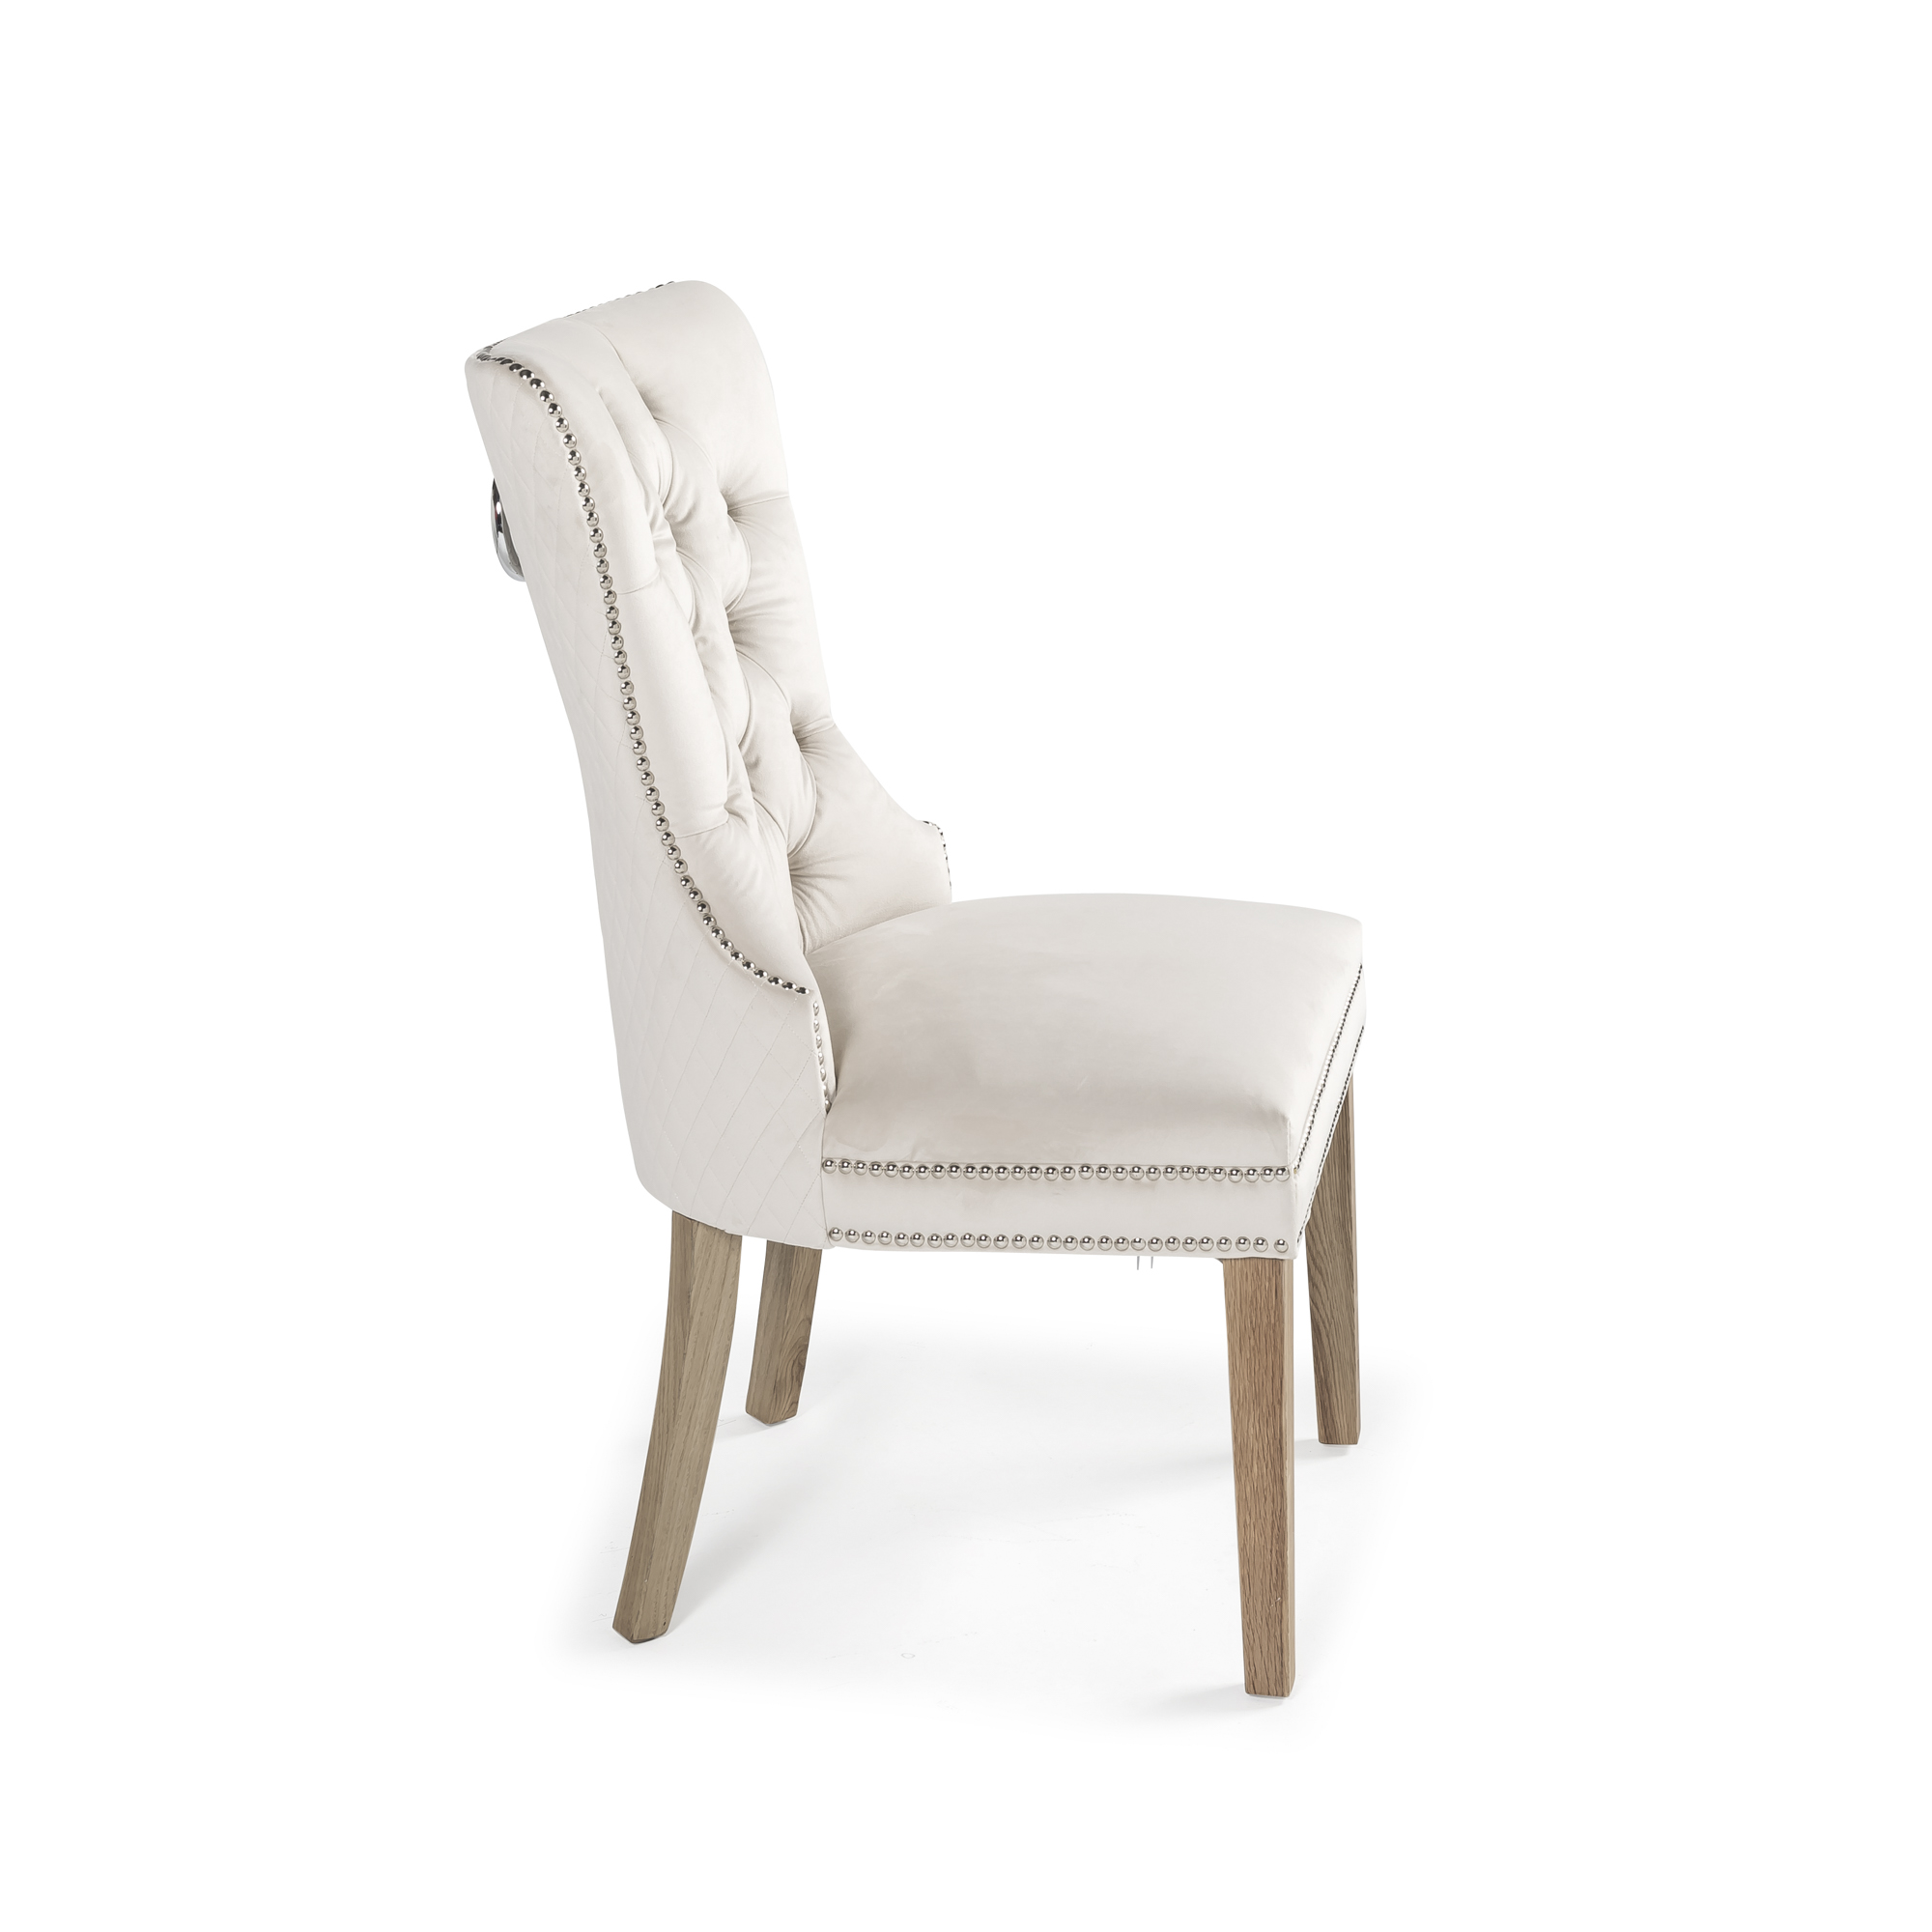 Hale Cream Quilted Brushed Velvet Studded Dining Chair with Hoop Handle – Oak Legs